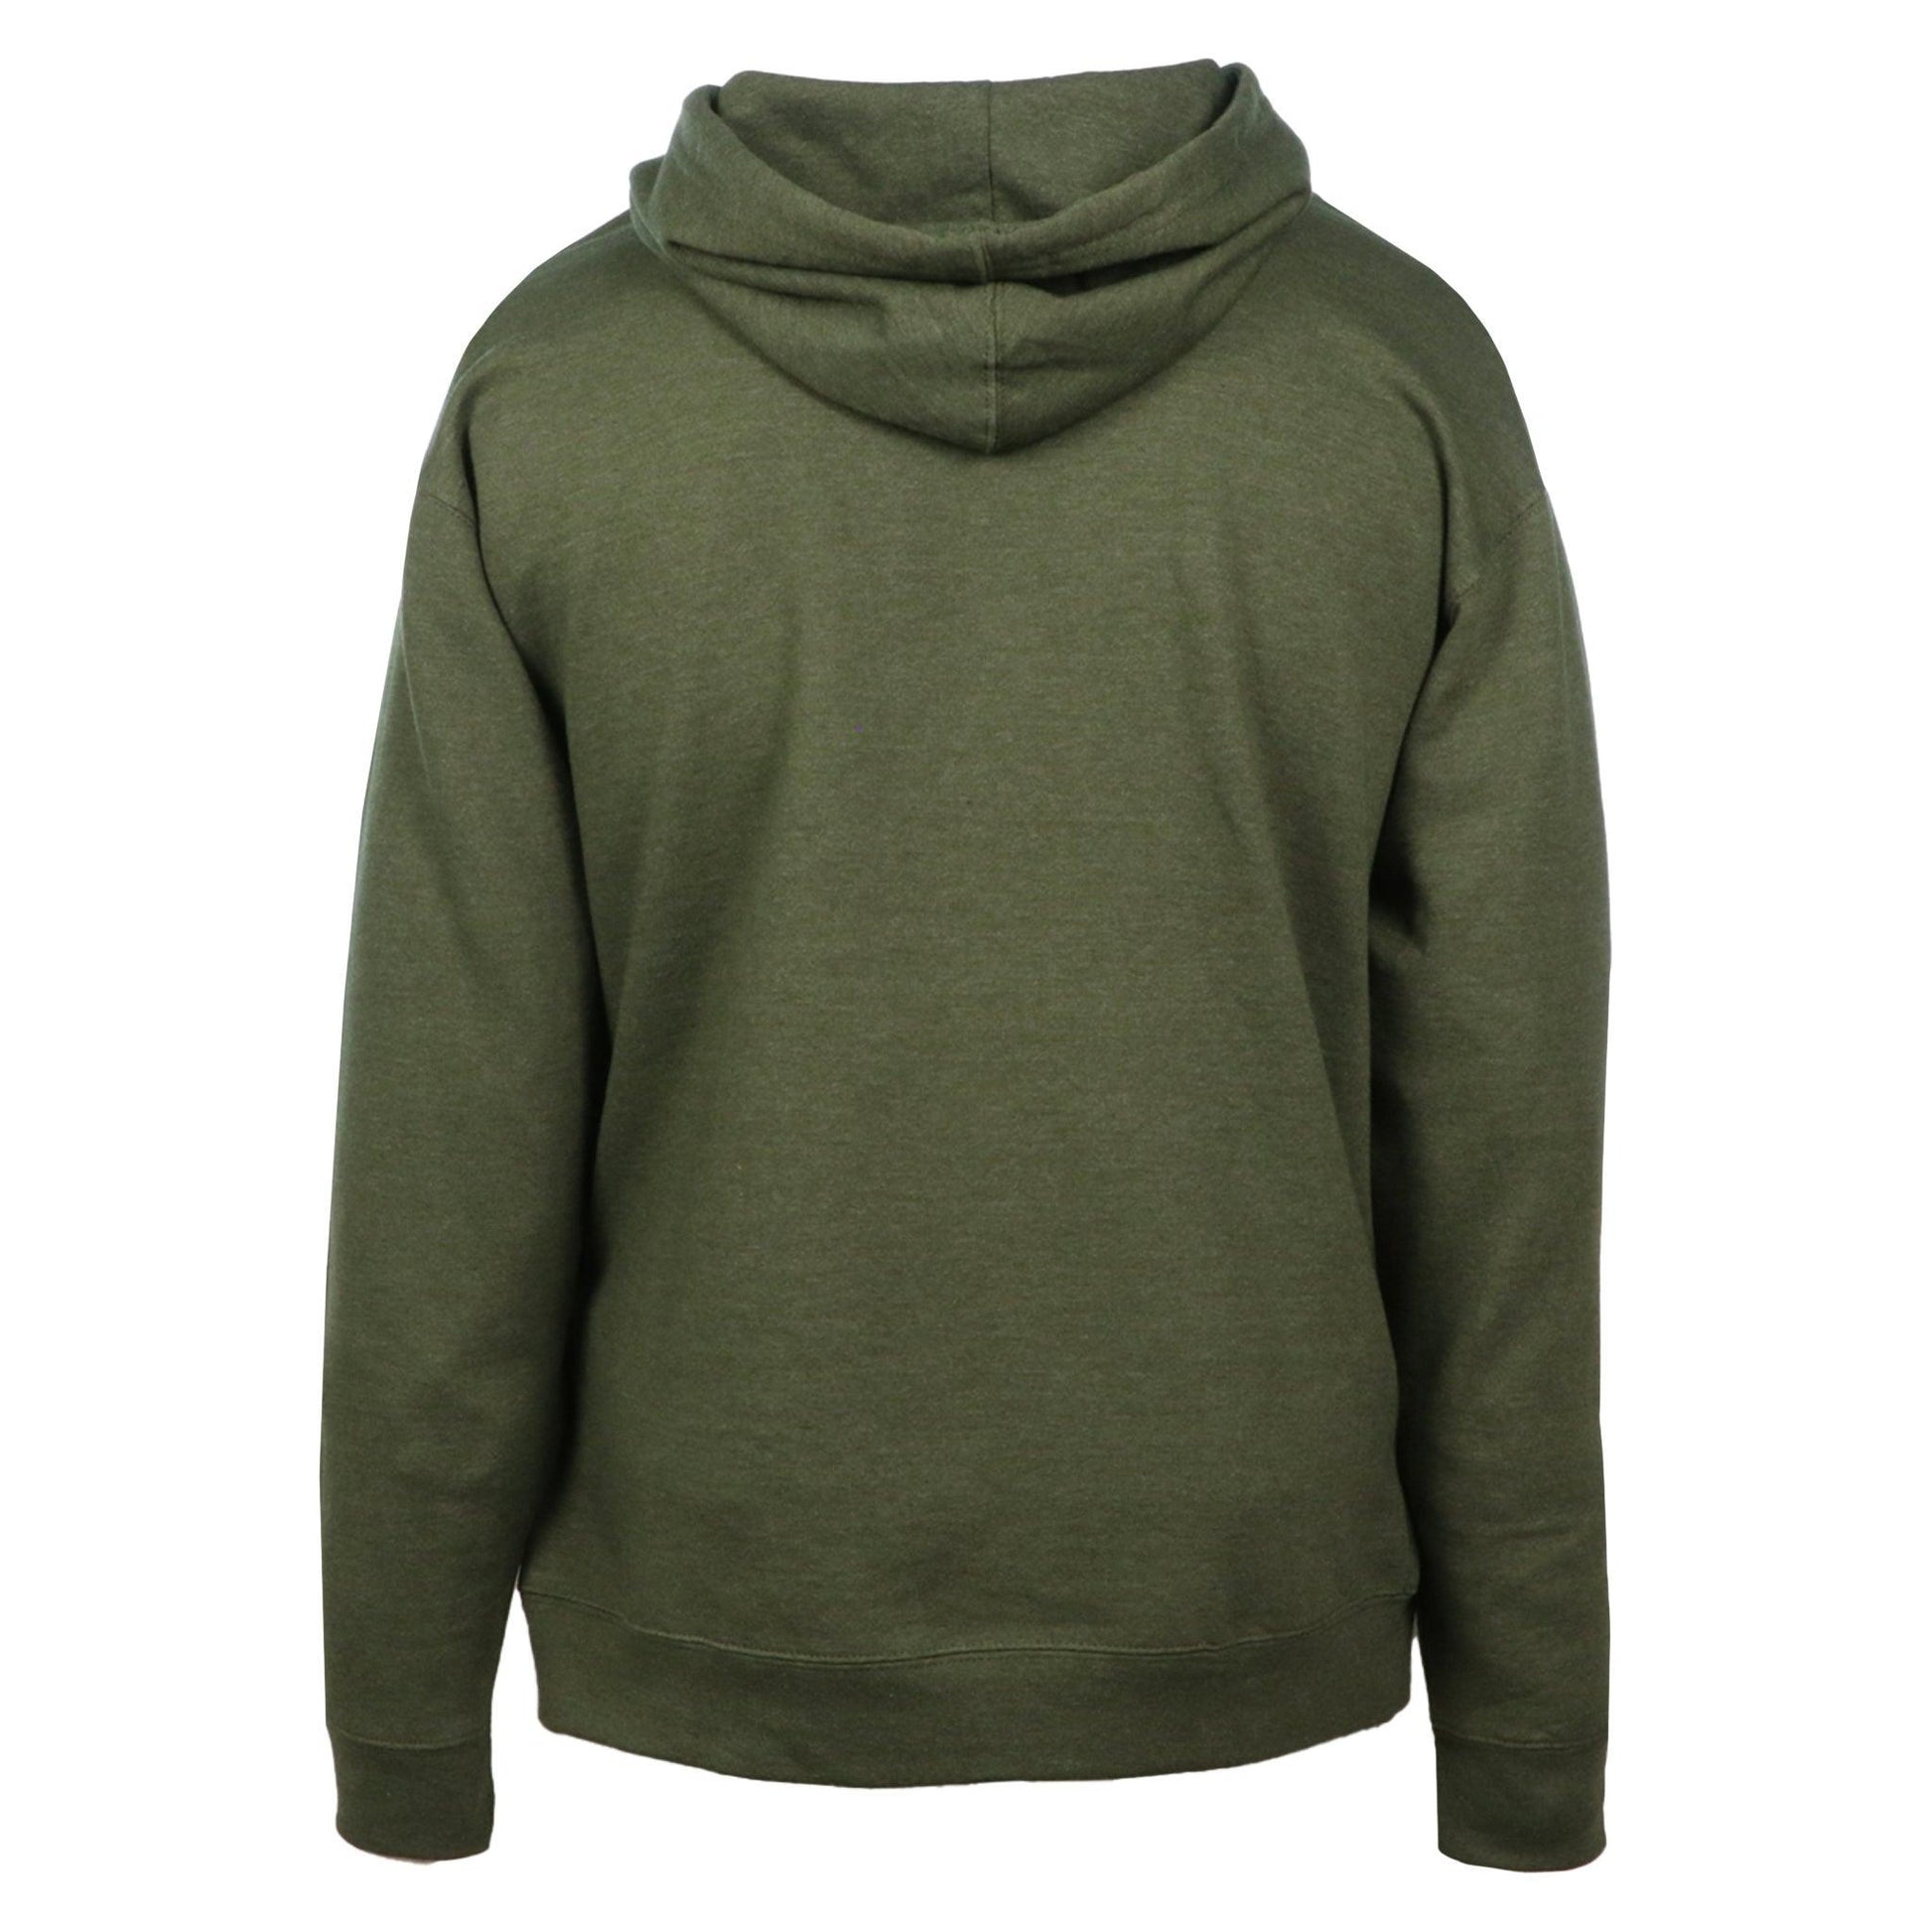 olive green budweiser military inspired hoodie